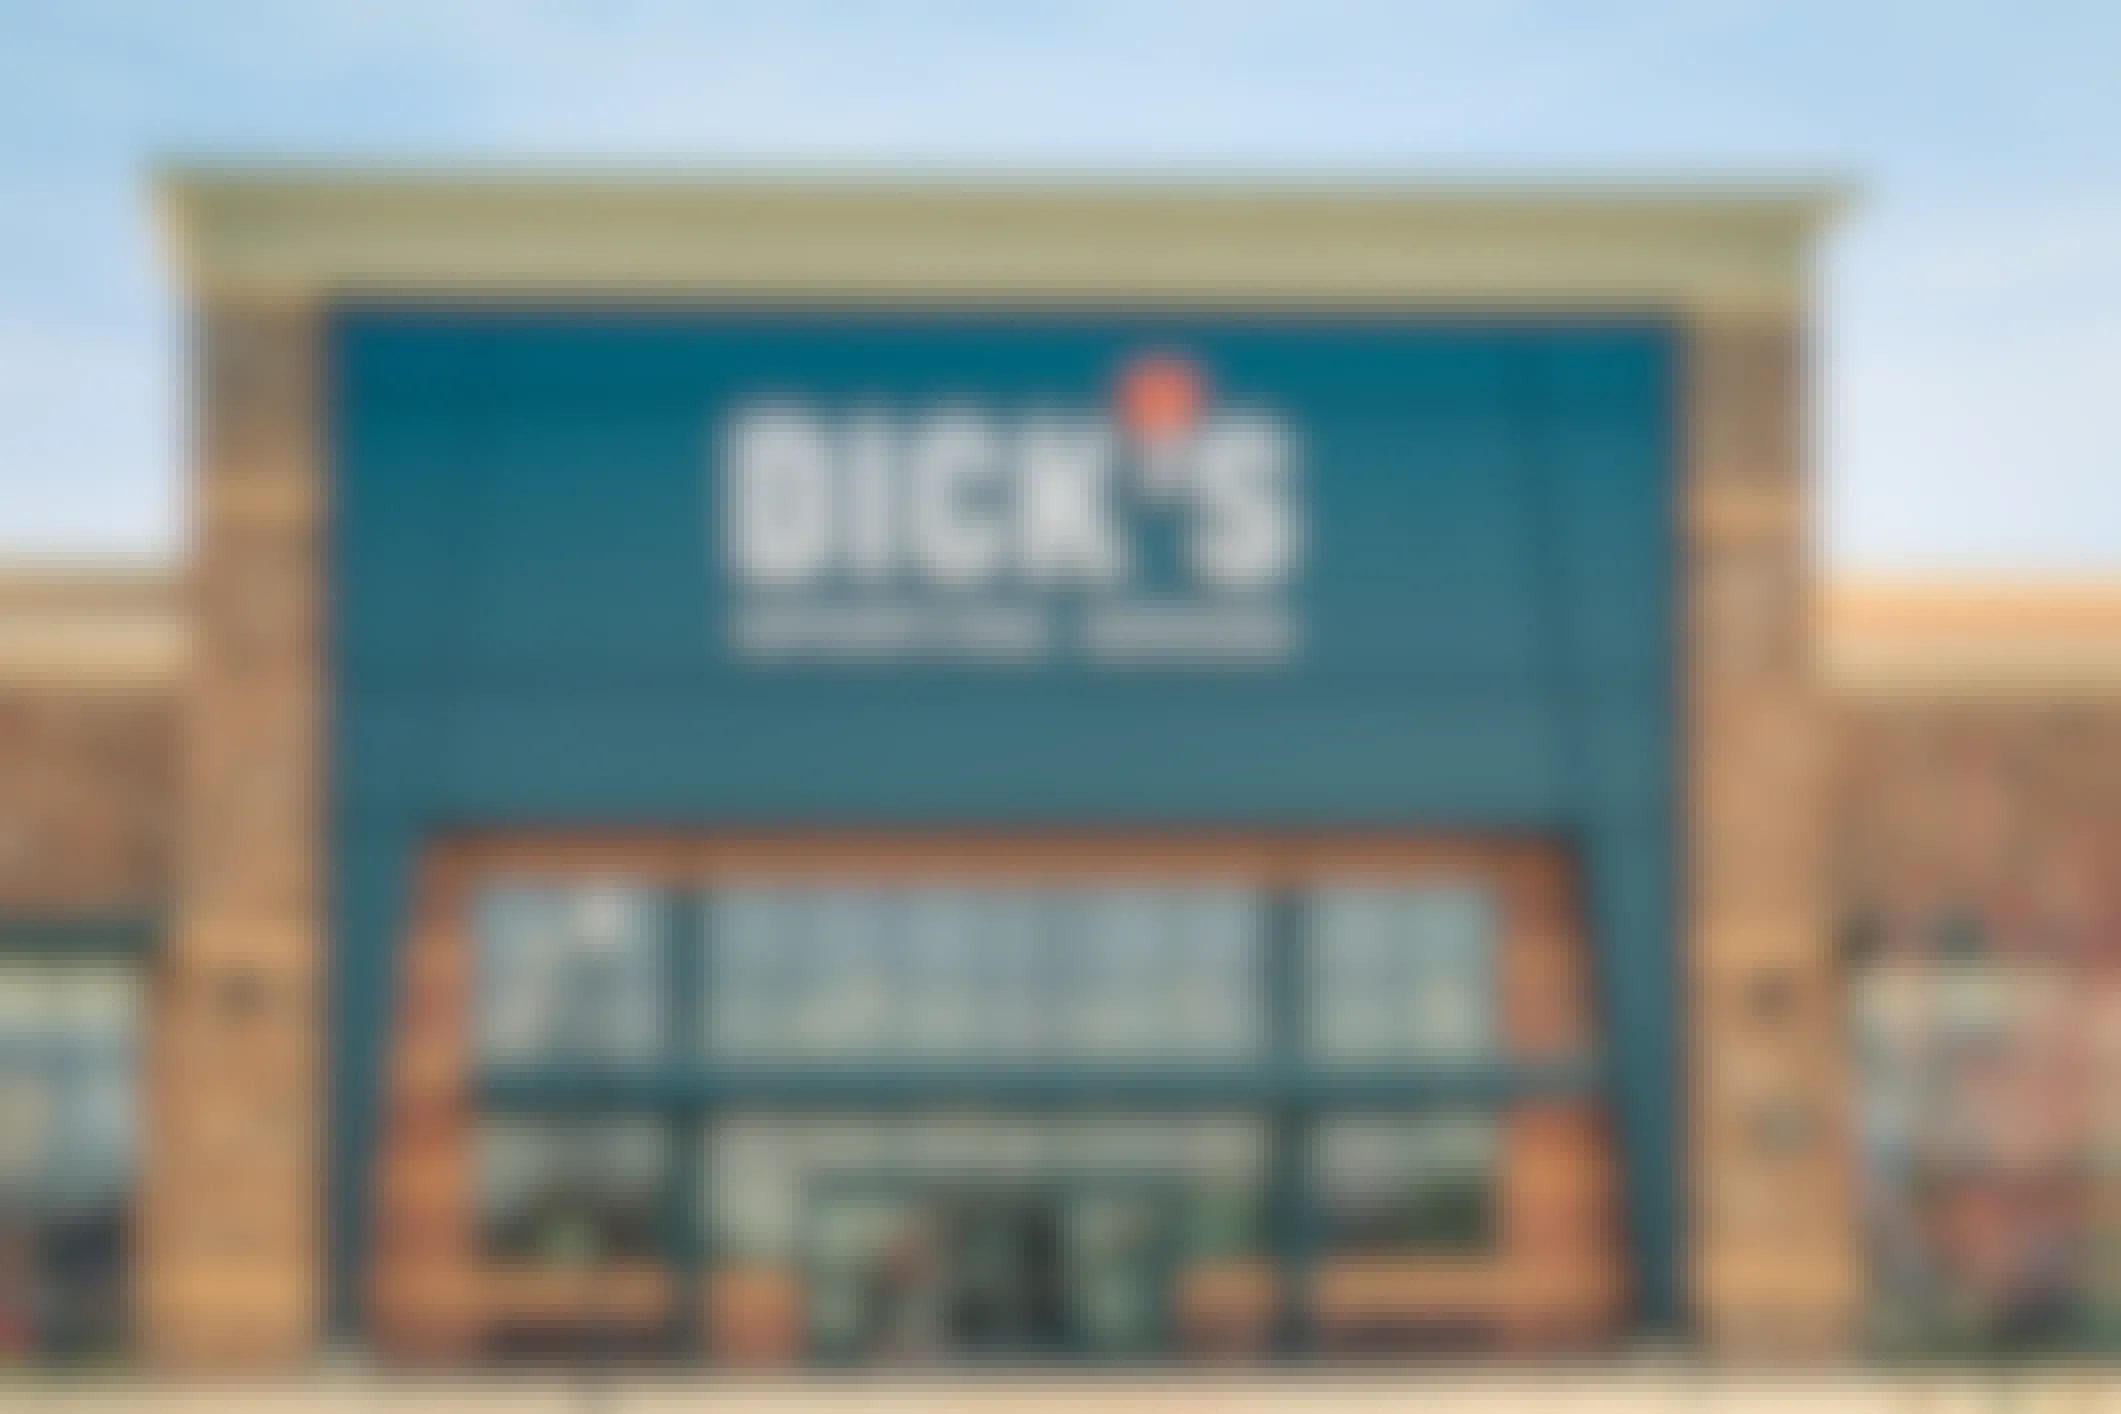 Exterior of Dicks Sporting Goods, a chain of retail stores in over 600 locations.